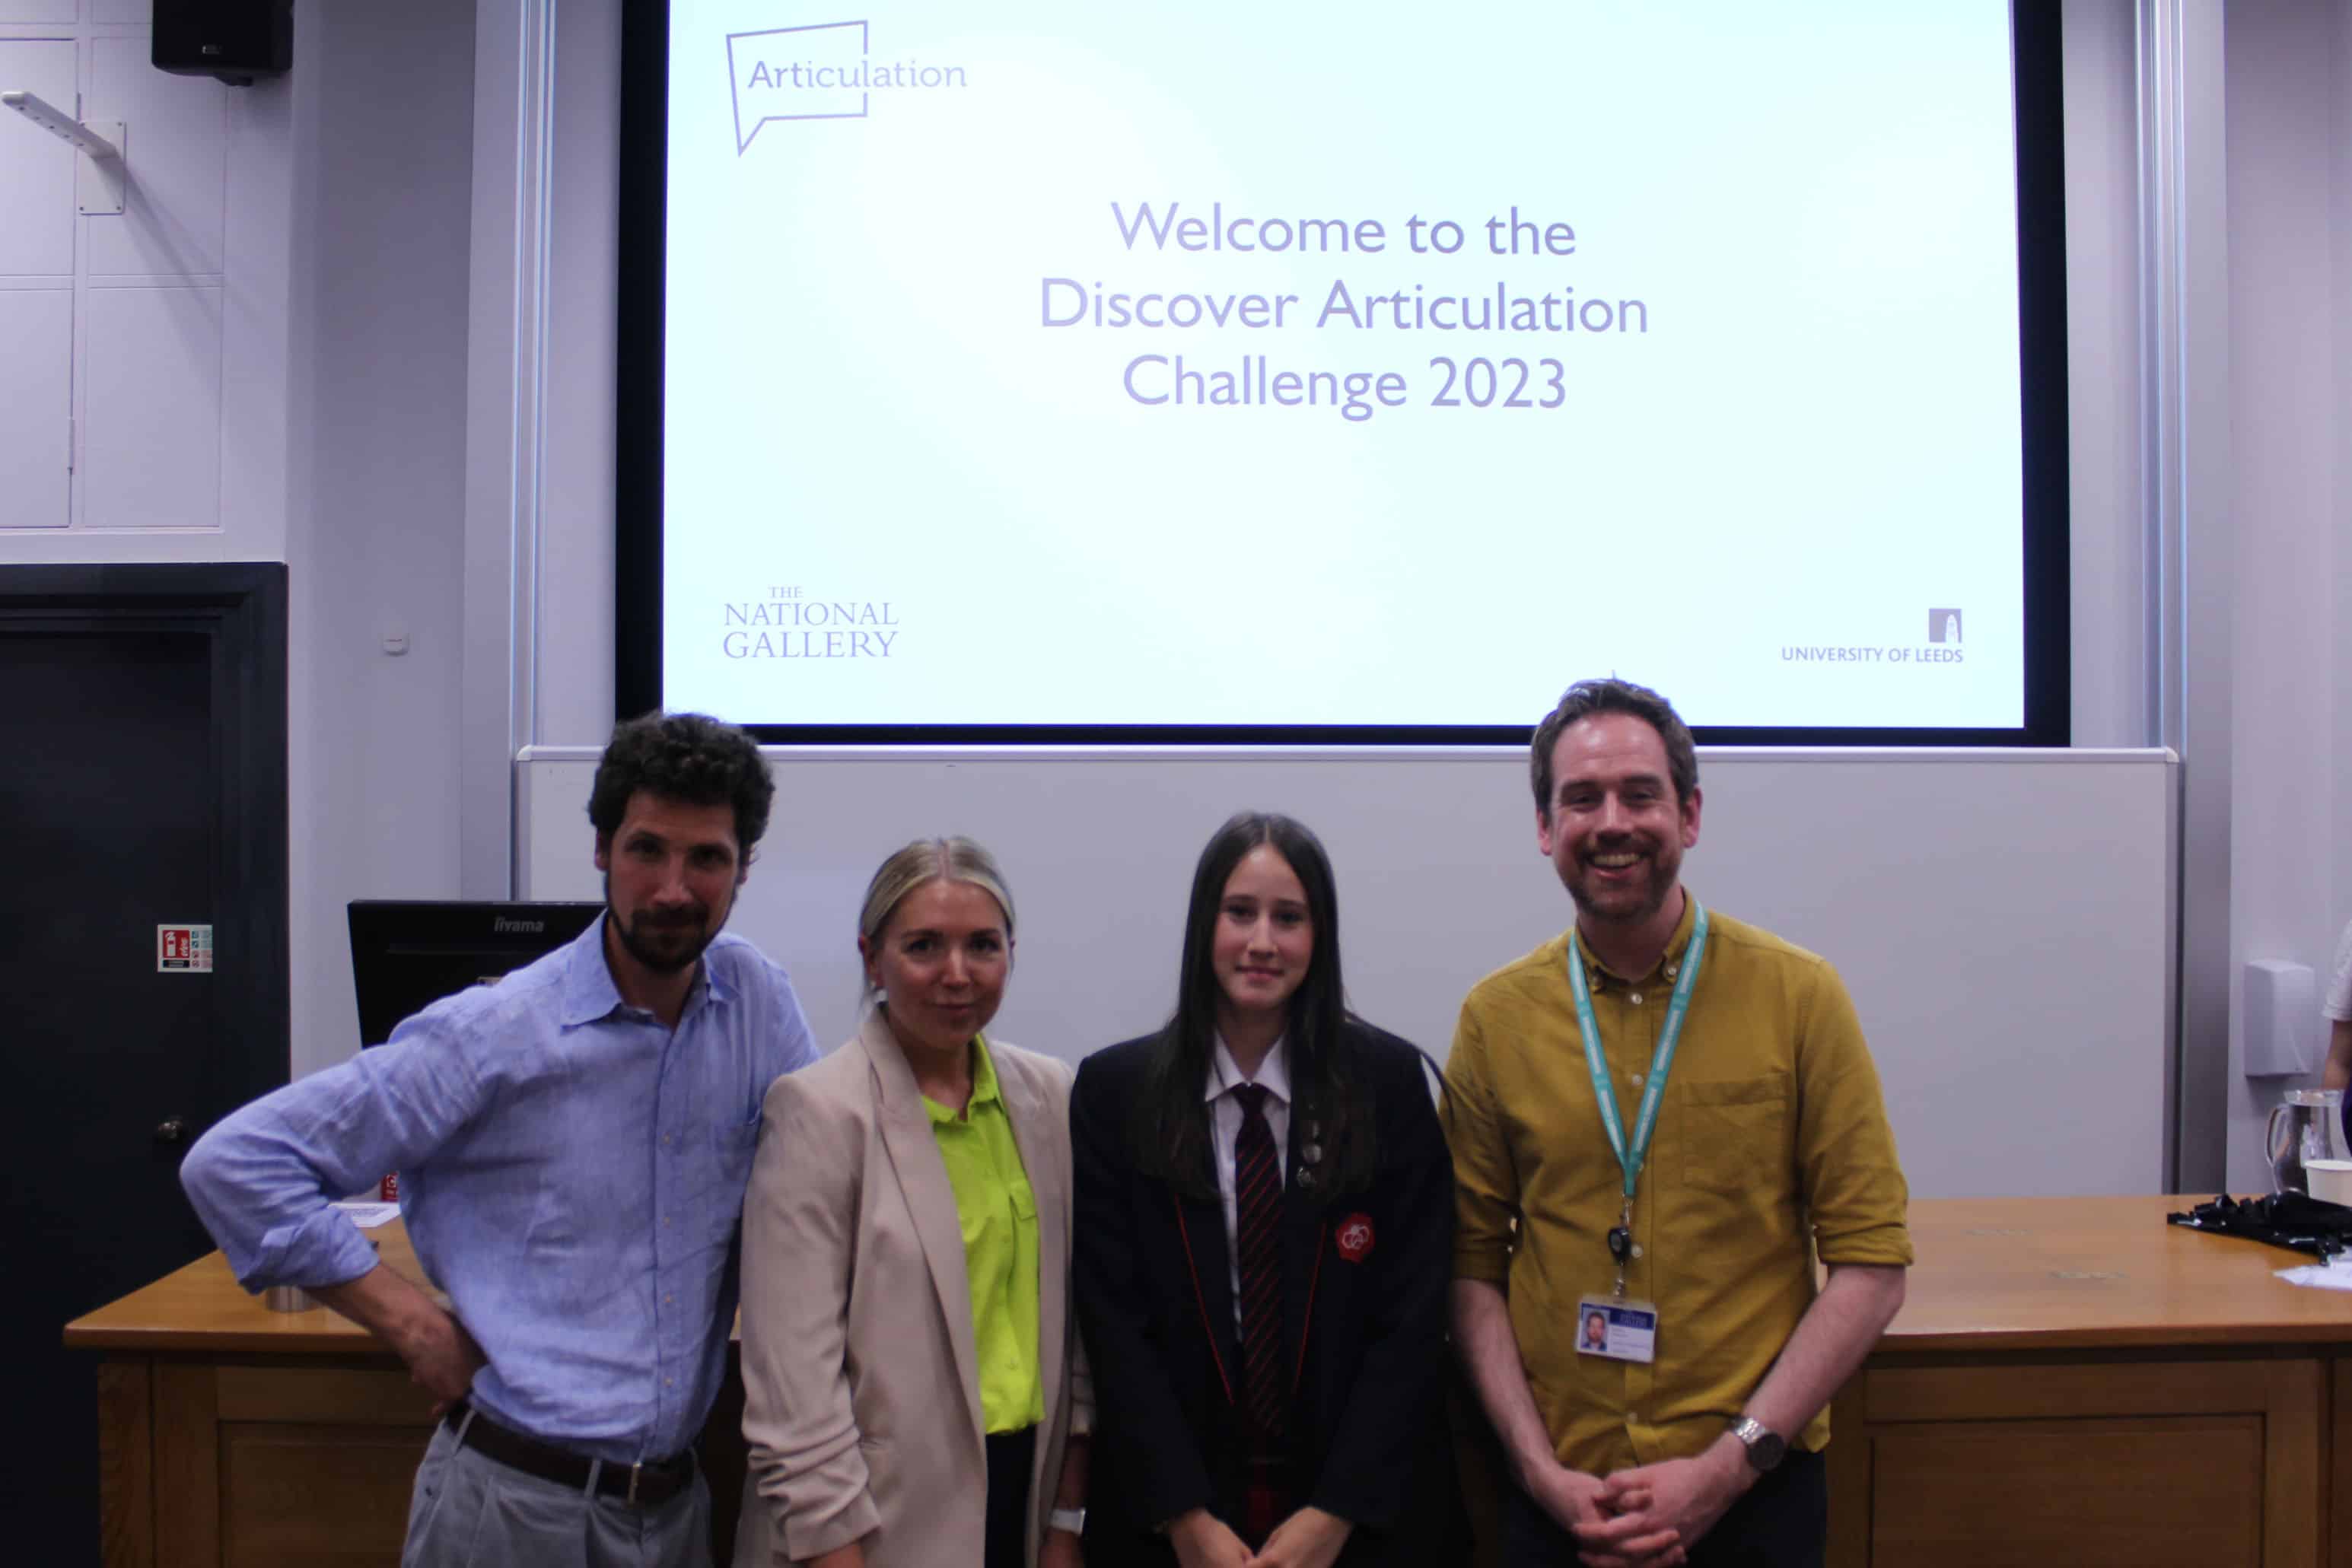 The judges of the Discover Articulation challenge, Mrs Patton (Lyla's art teacher) and Didsbury High School student Lyla stand together smiling in front of a projector screen which reads: "Welcome to the Discover Articulation Challenge 2023"